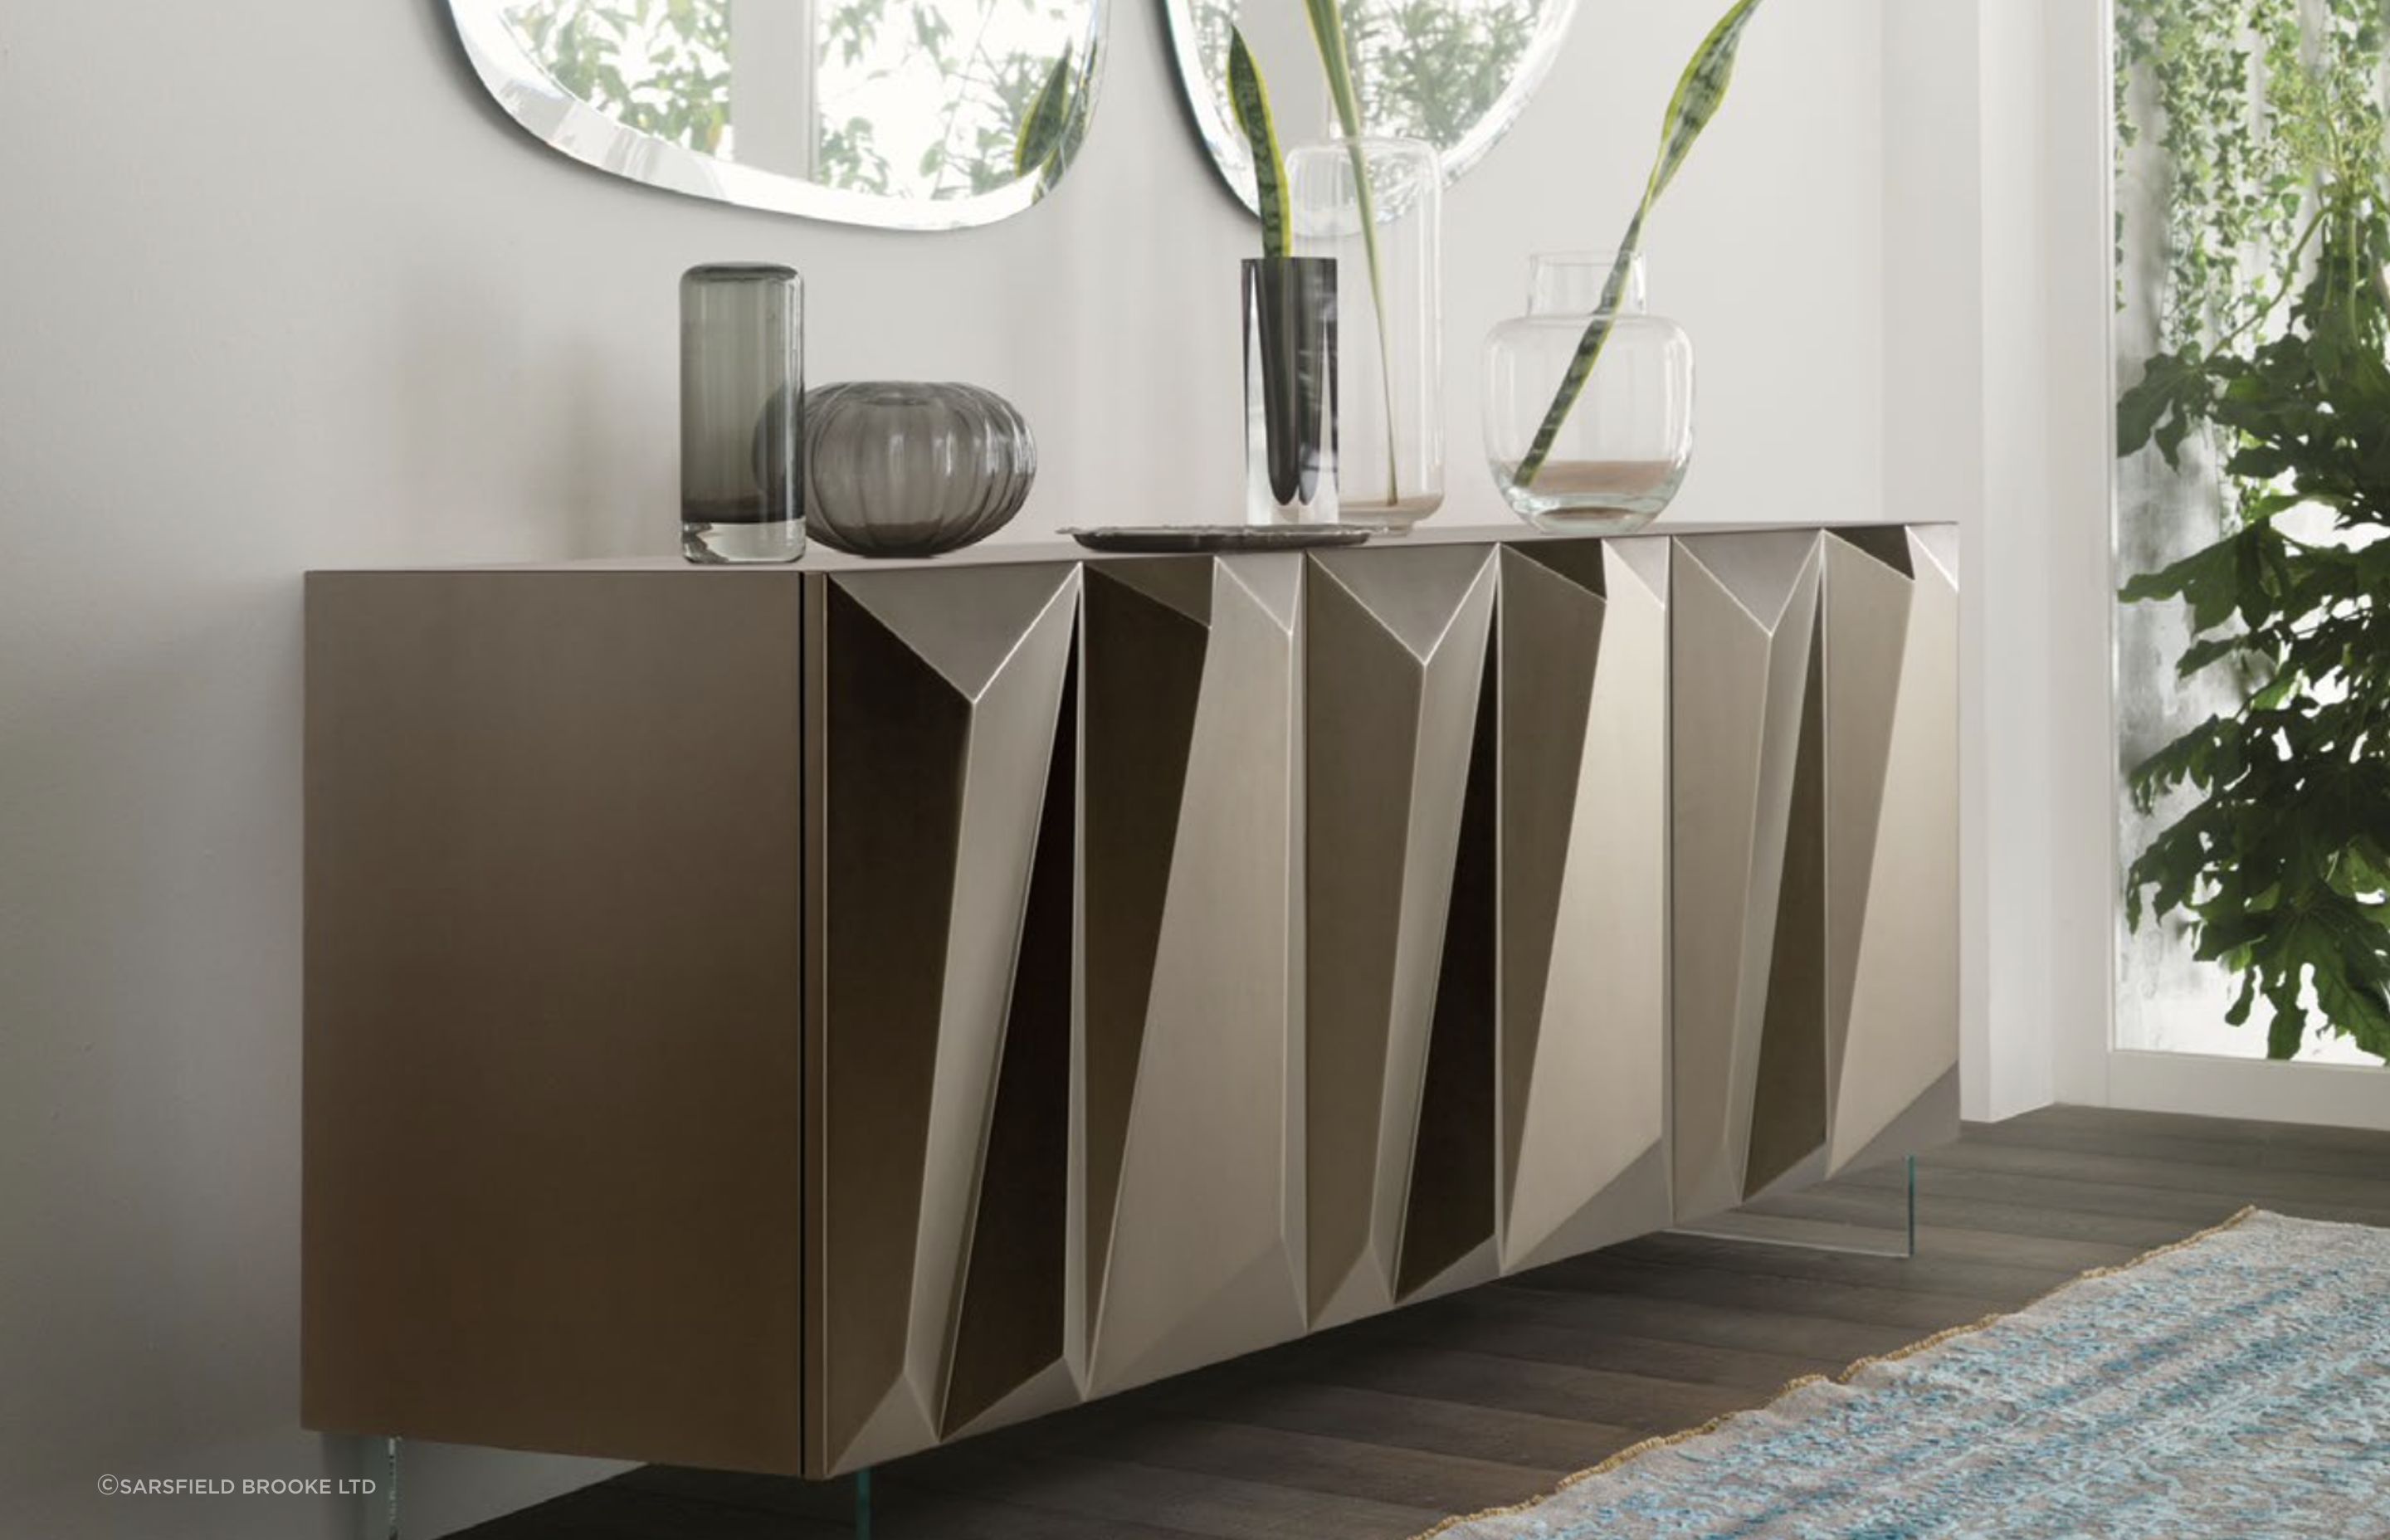 The Quartz Sideboard is pure design indulgence that delivers on multiple levels